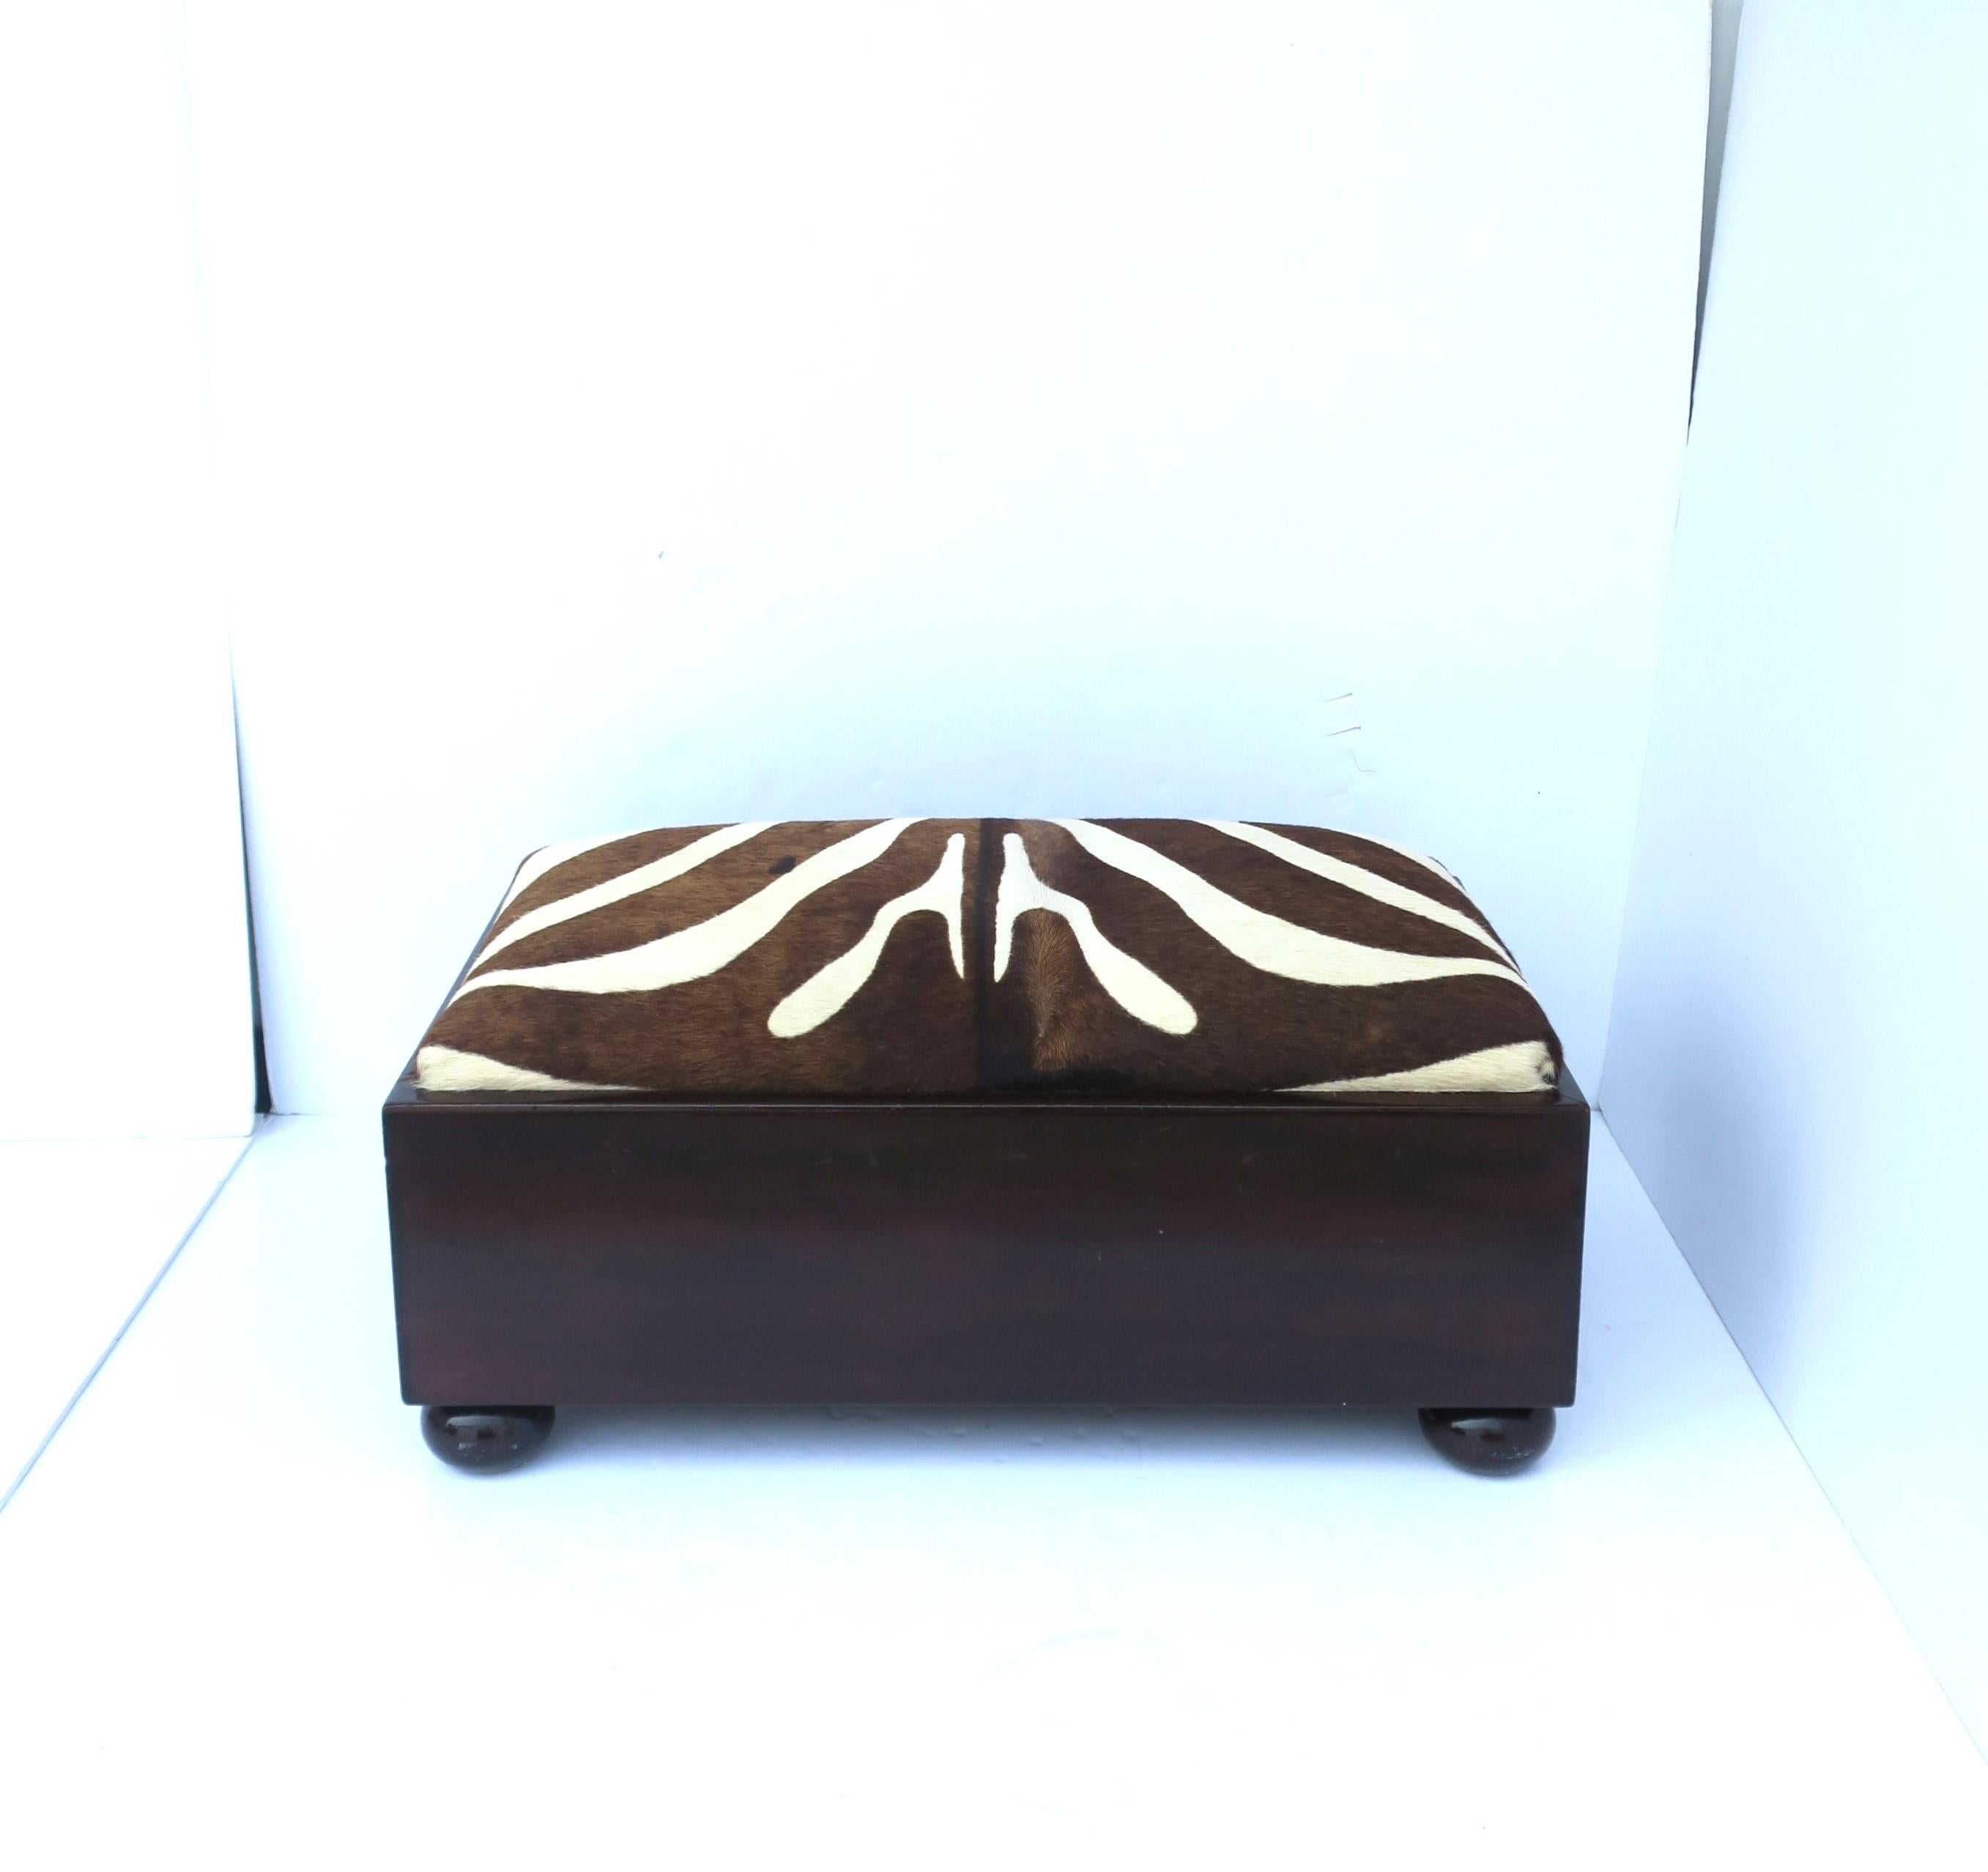 A beautiful wood and zebra hide footstool or low bench / stool, circa early to mid-20th century. Piece is rectangular with bun feet, with a footrest or seat upholstered in authentic zebra hide. 

Dimensions: 15